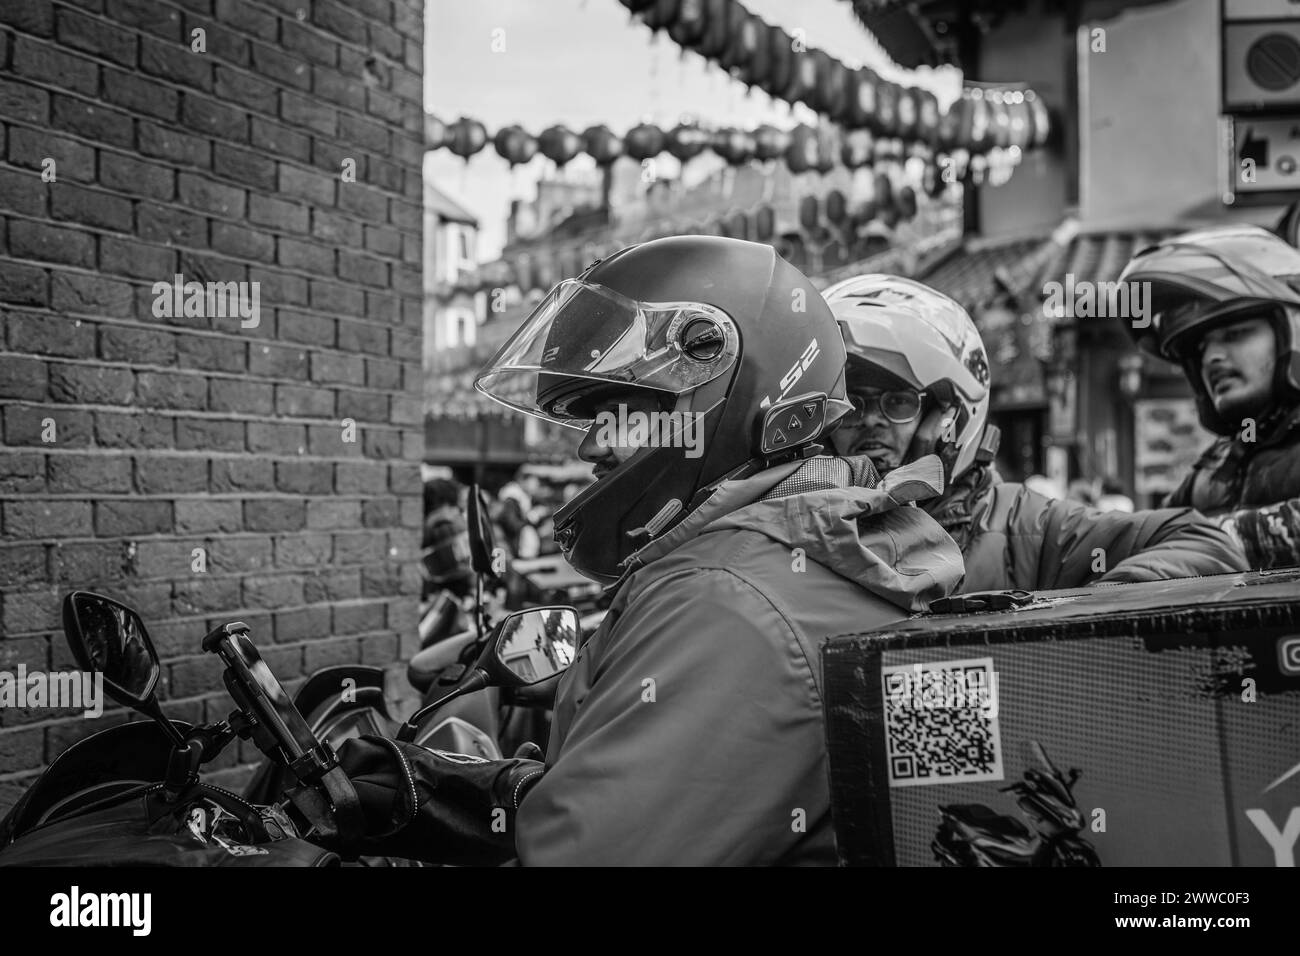 Delivery riders take a break in London's Chinatown. Stock Photo